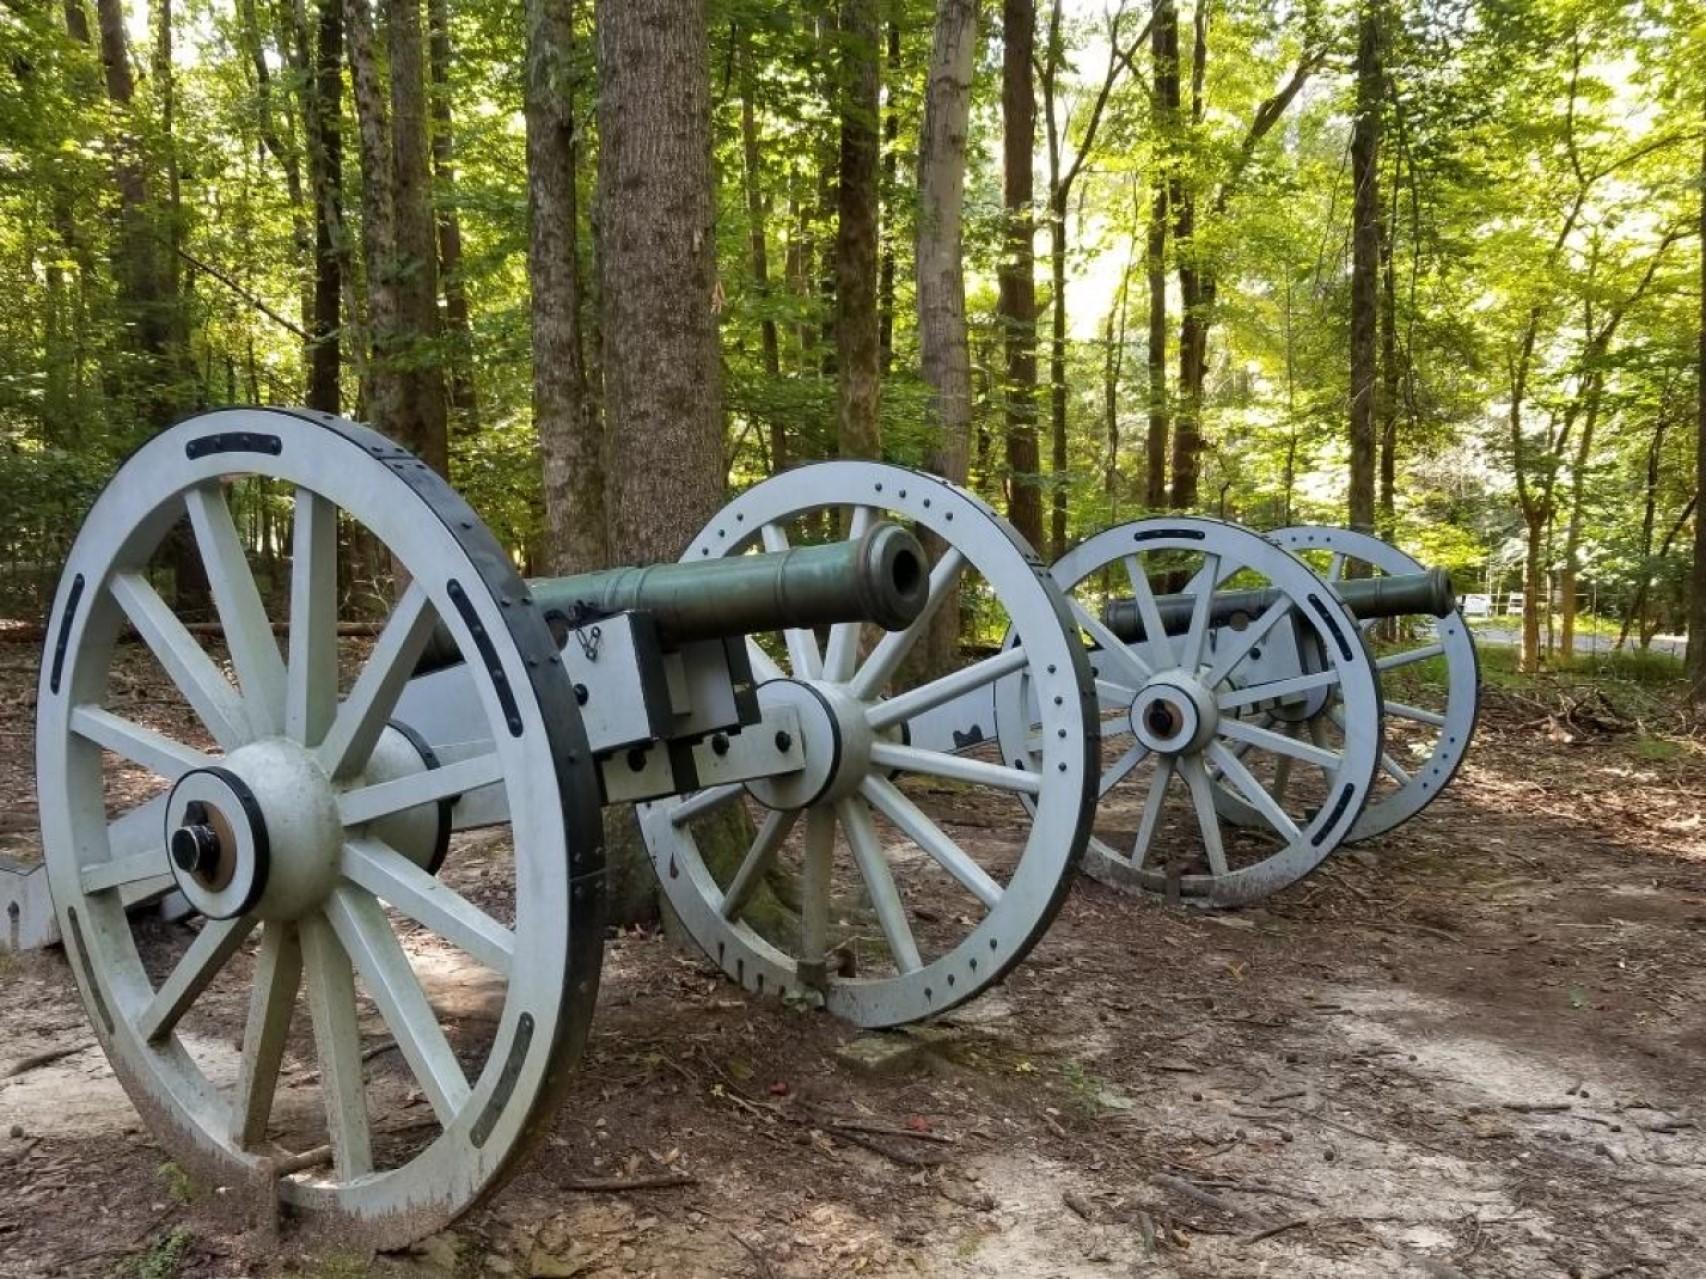 6 pounder cannons